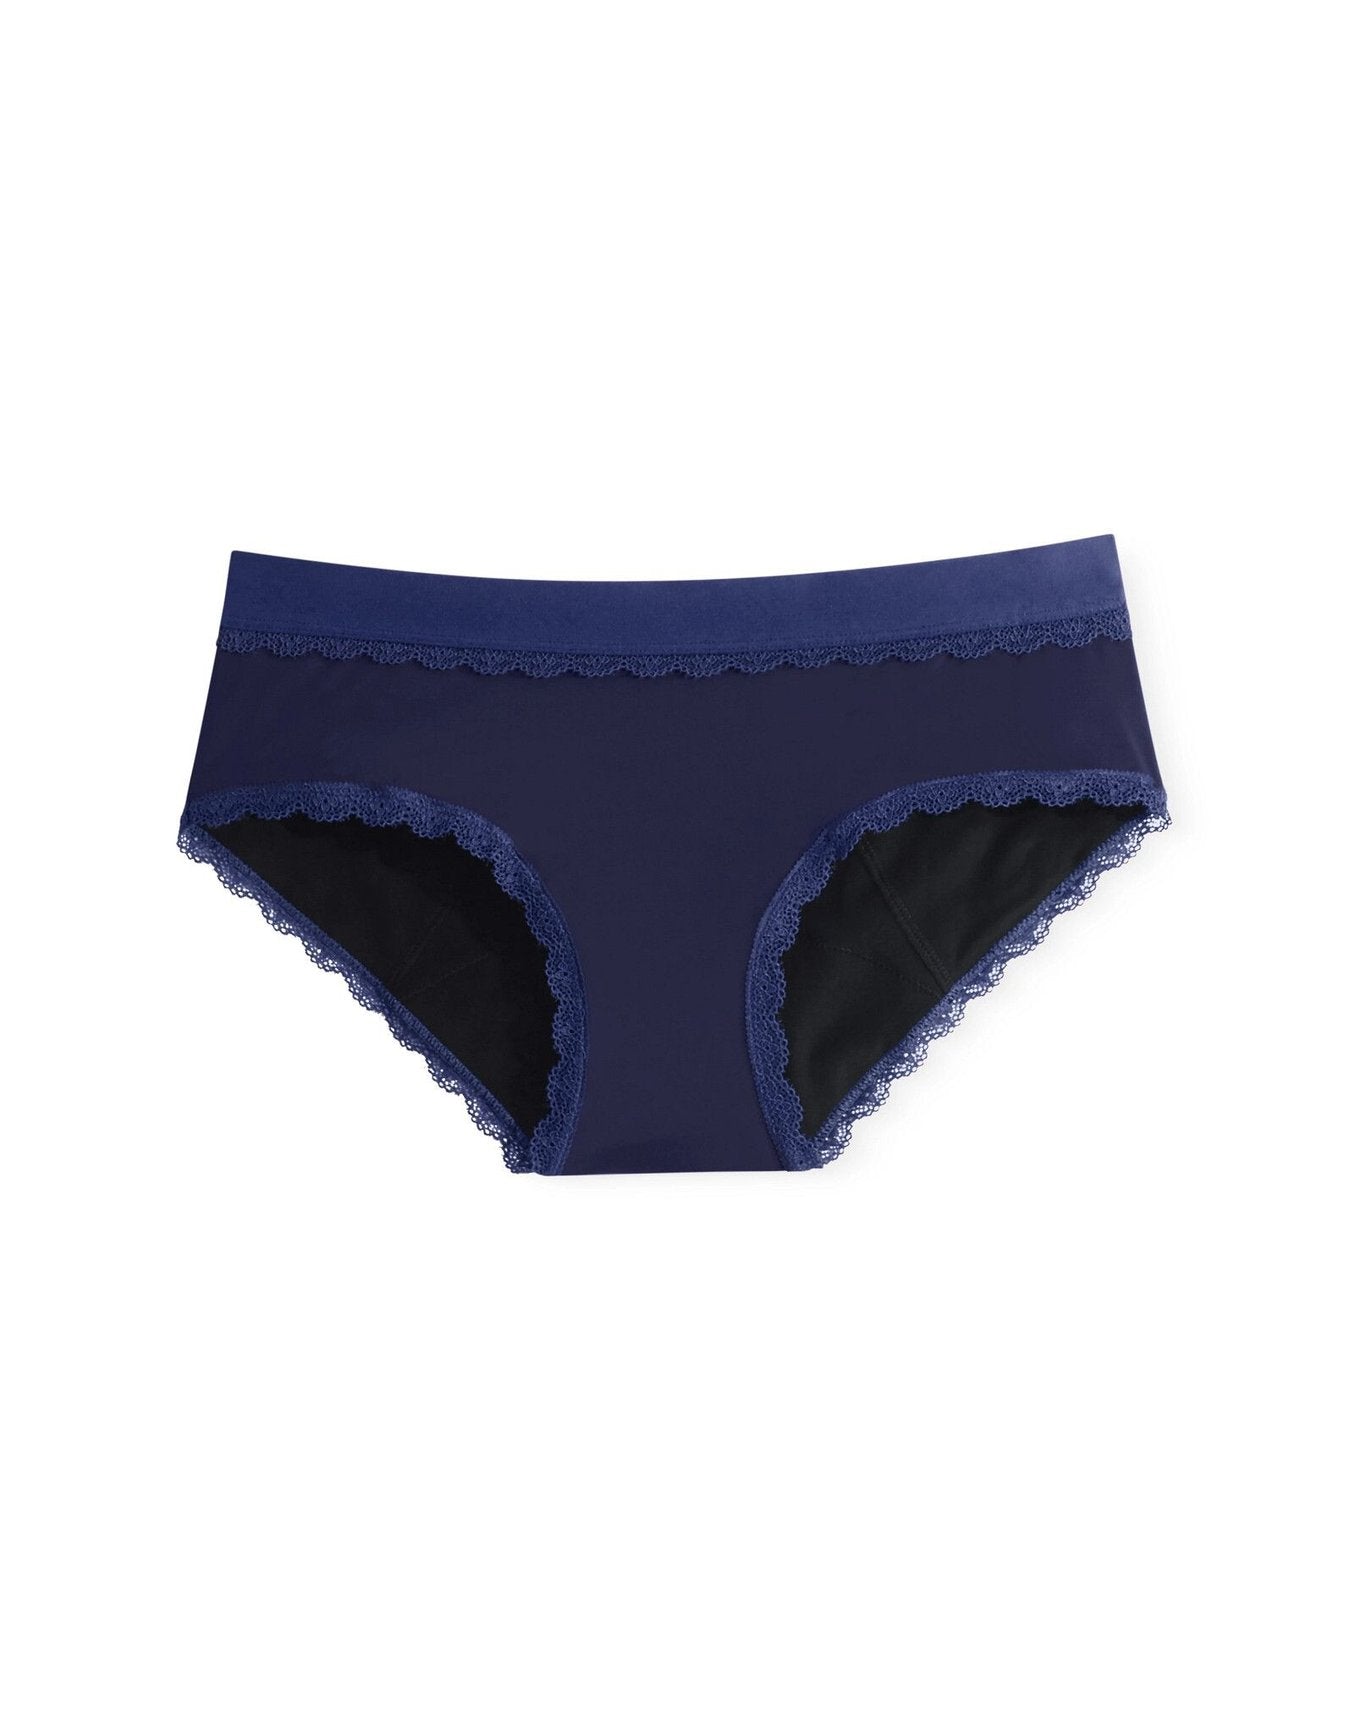 Joyja Olivia period-proof panty in color Evening Blue and shape hipster